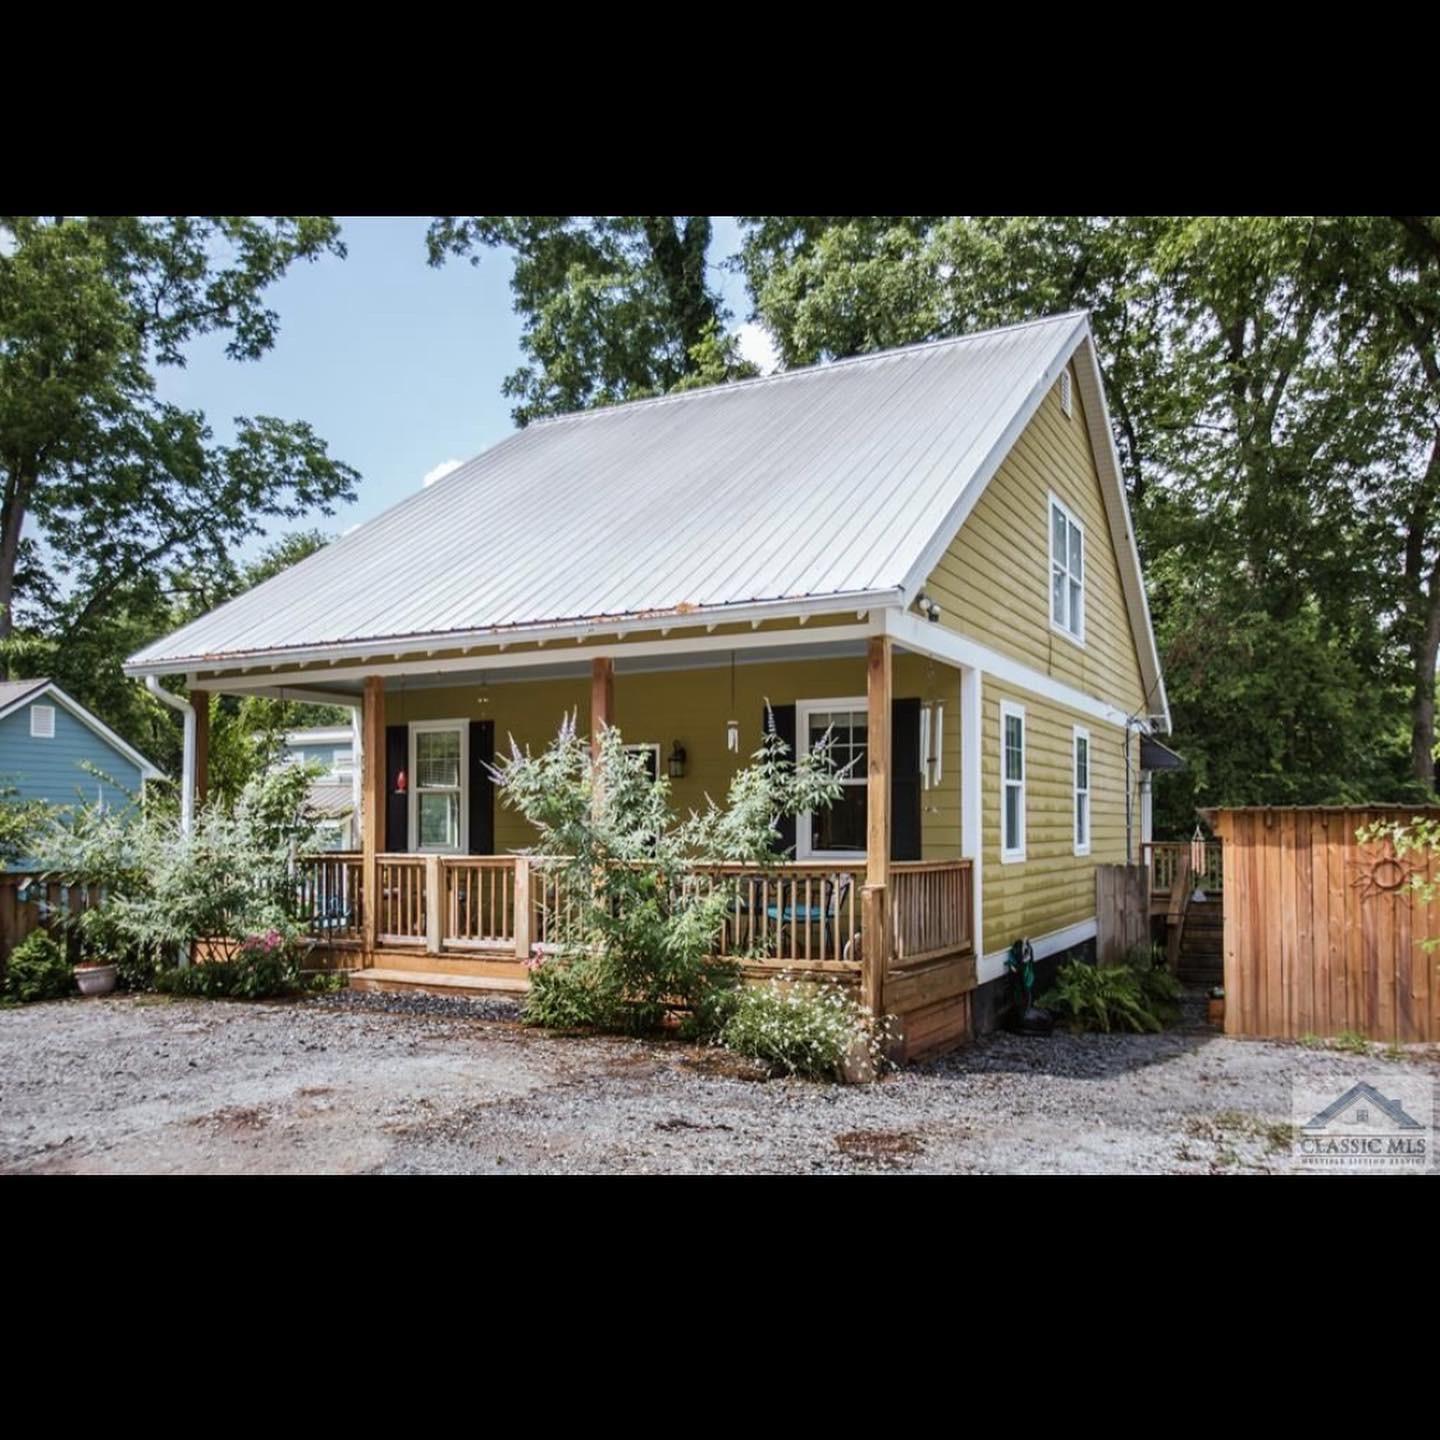 Bought our first house! July 2020